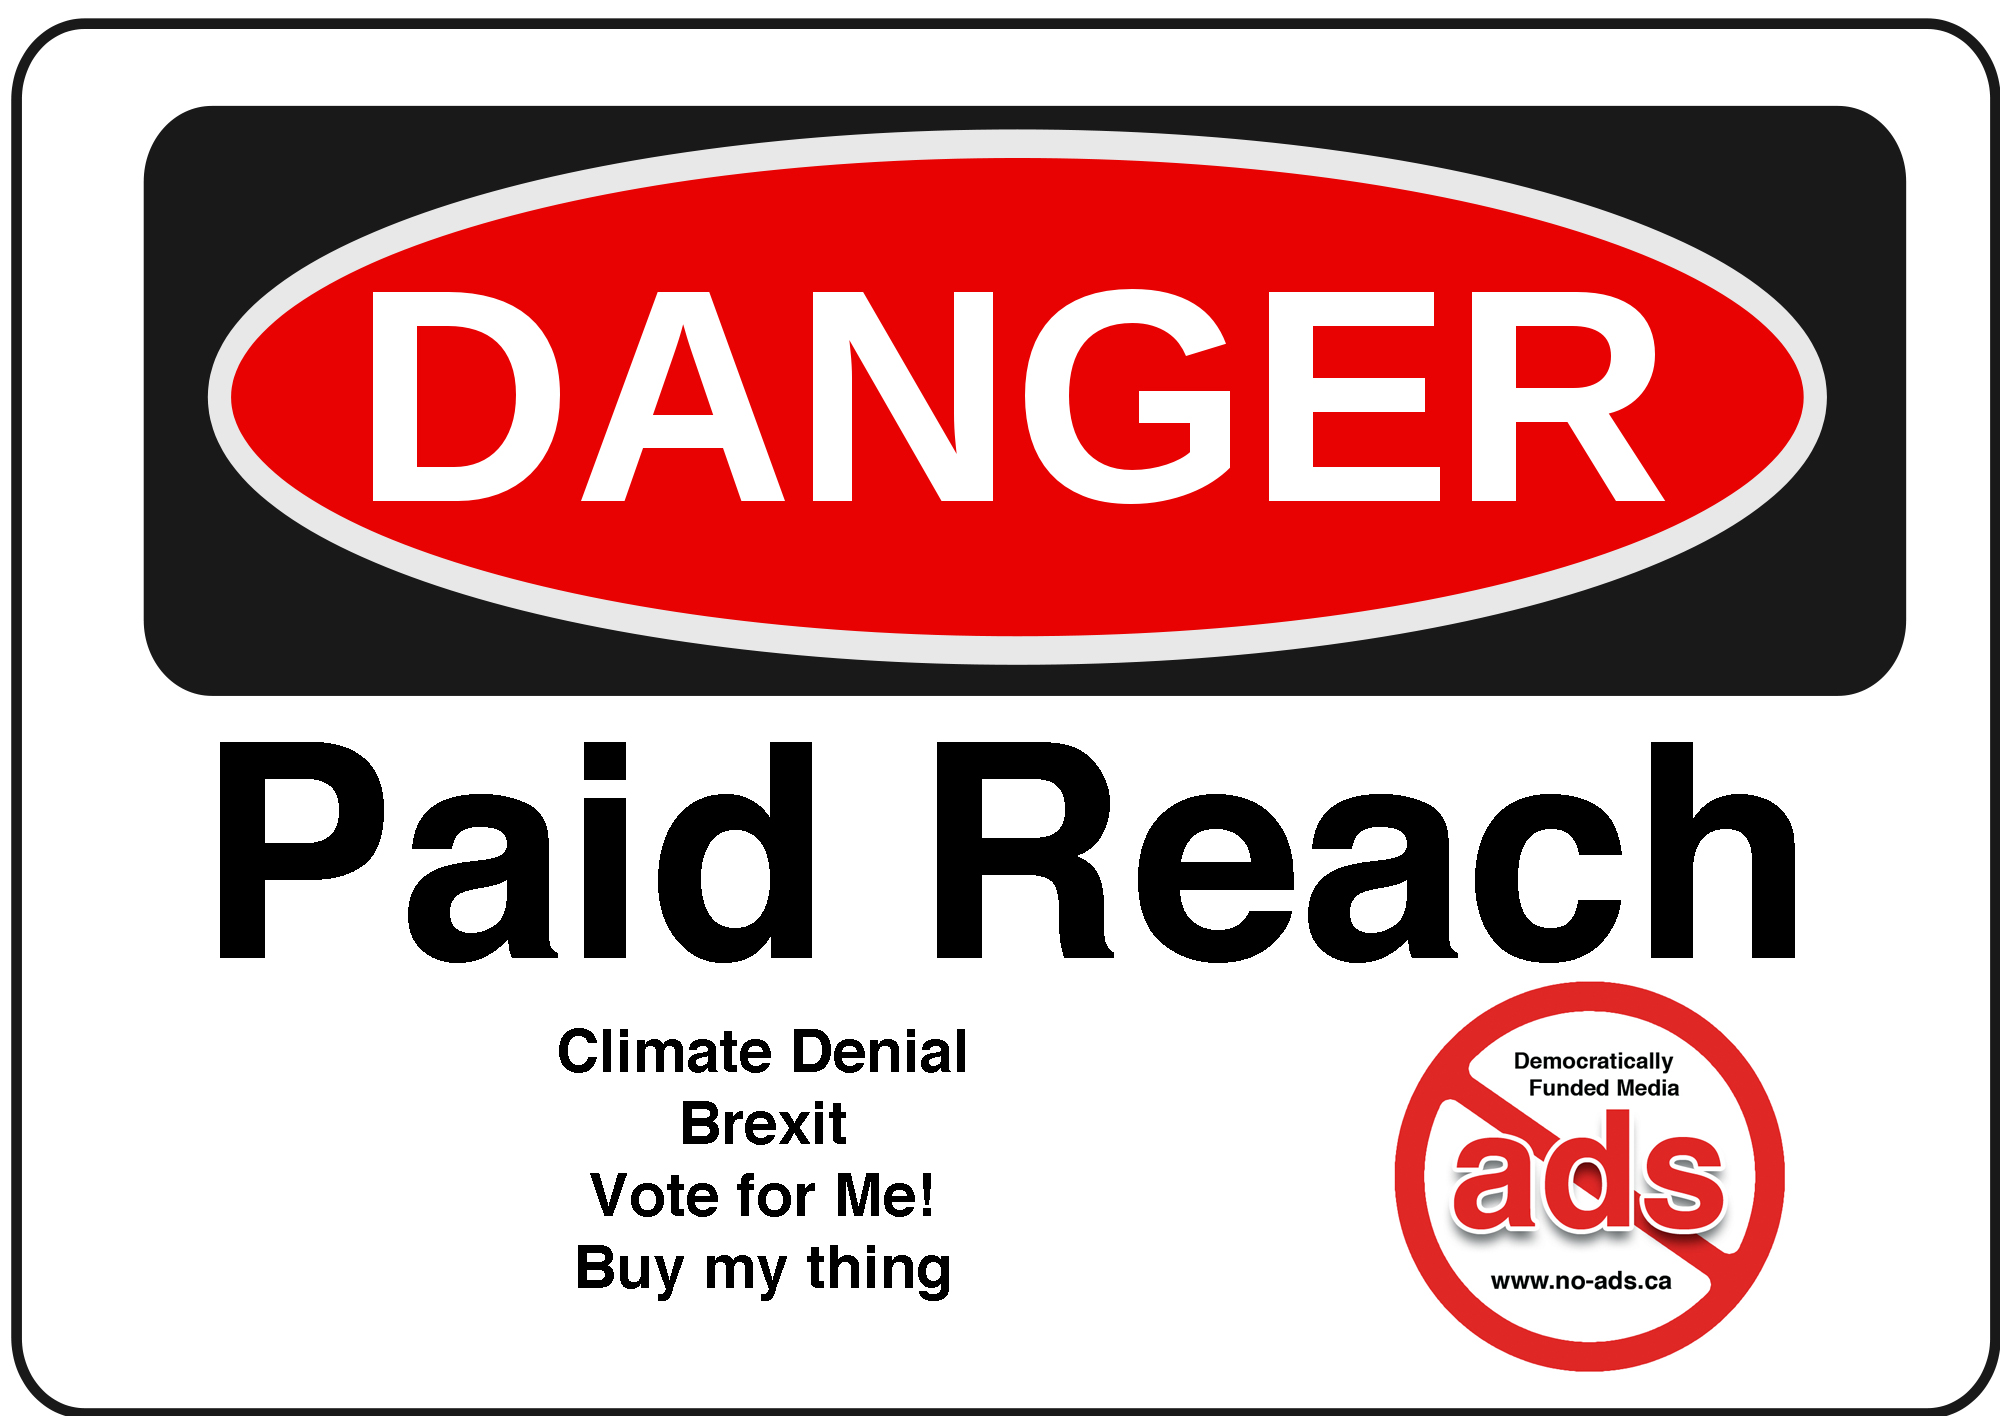 paid reach poses a public safety threat